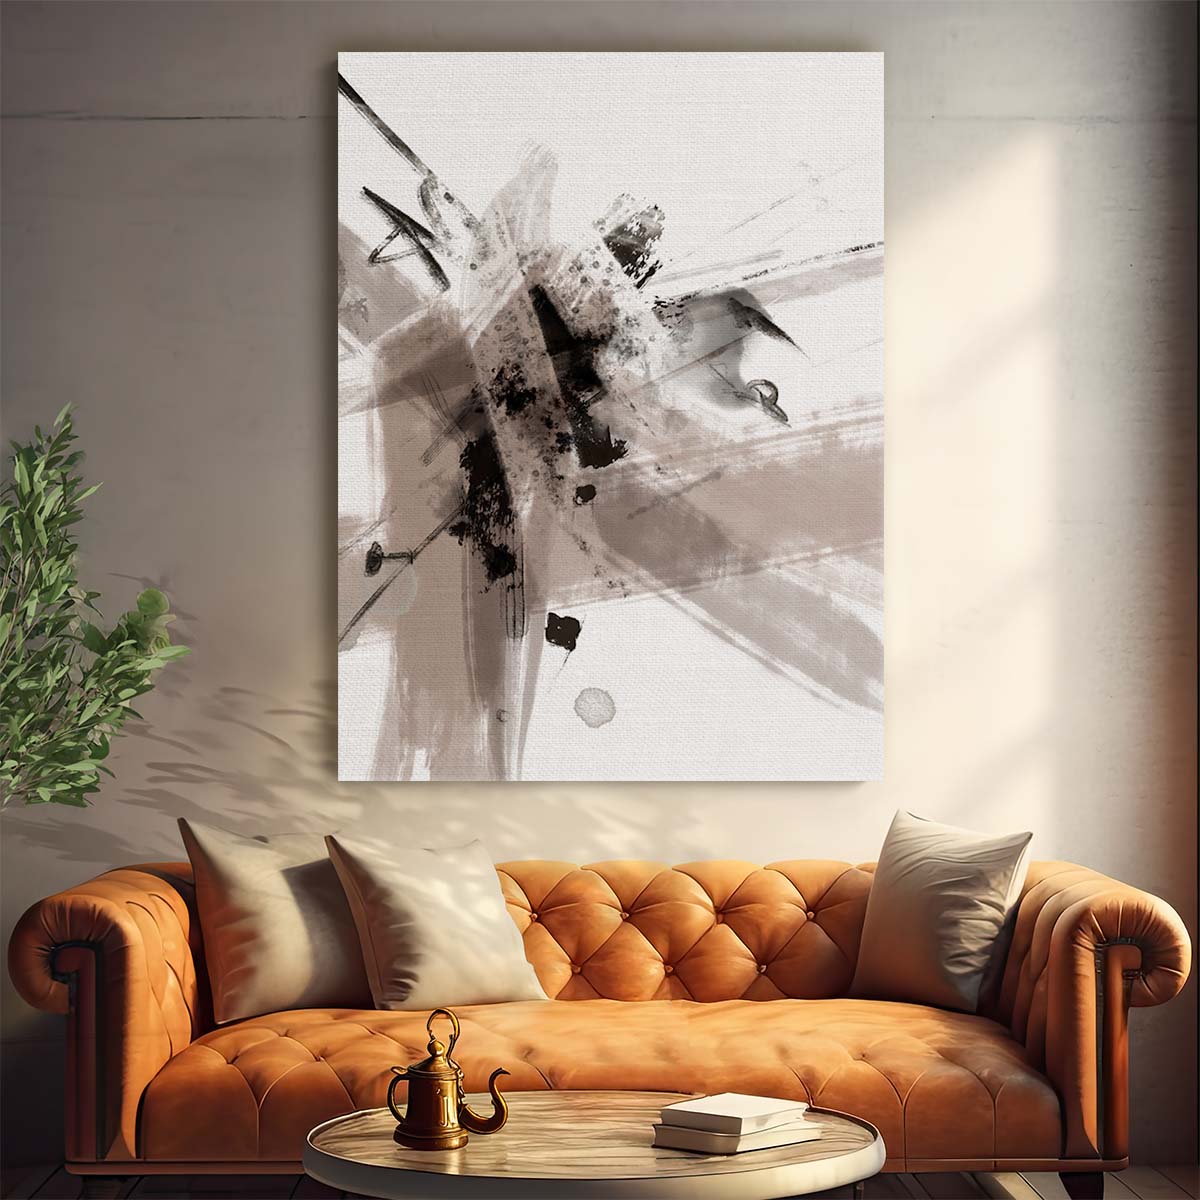 Abstract Geometric Illustration Painting with Color Splash by Luxuriance Designs, made in USA